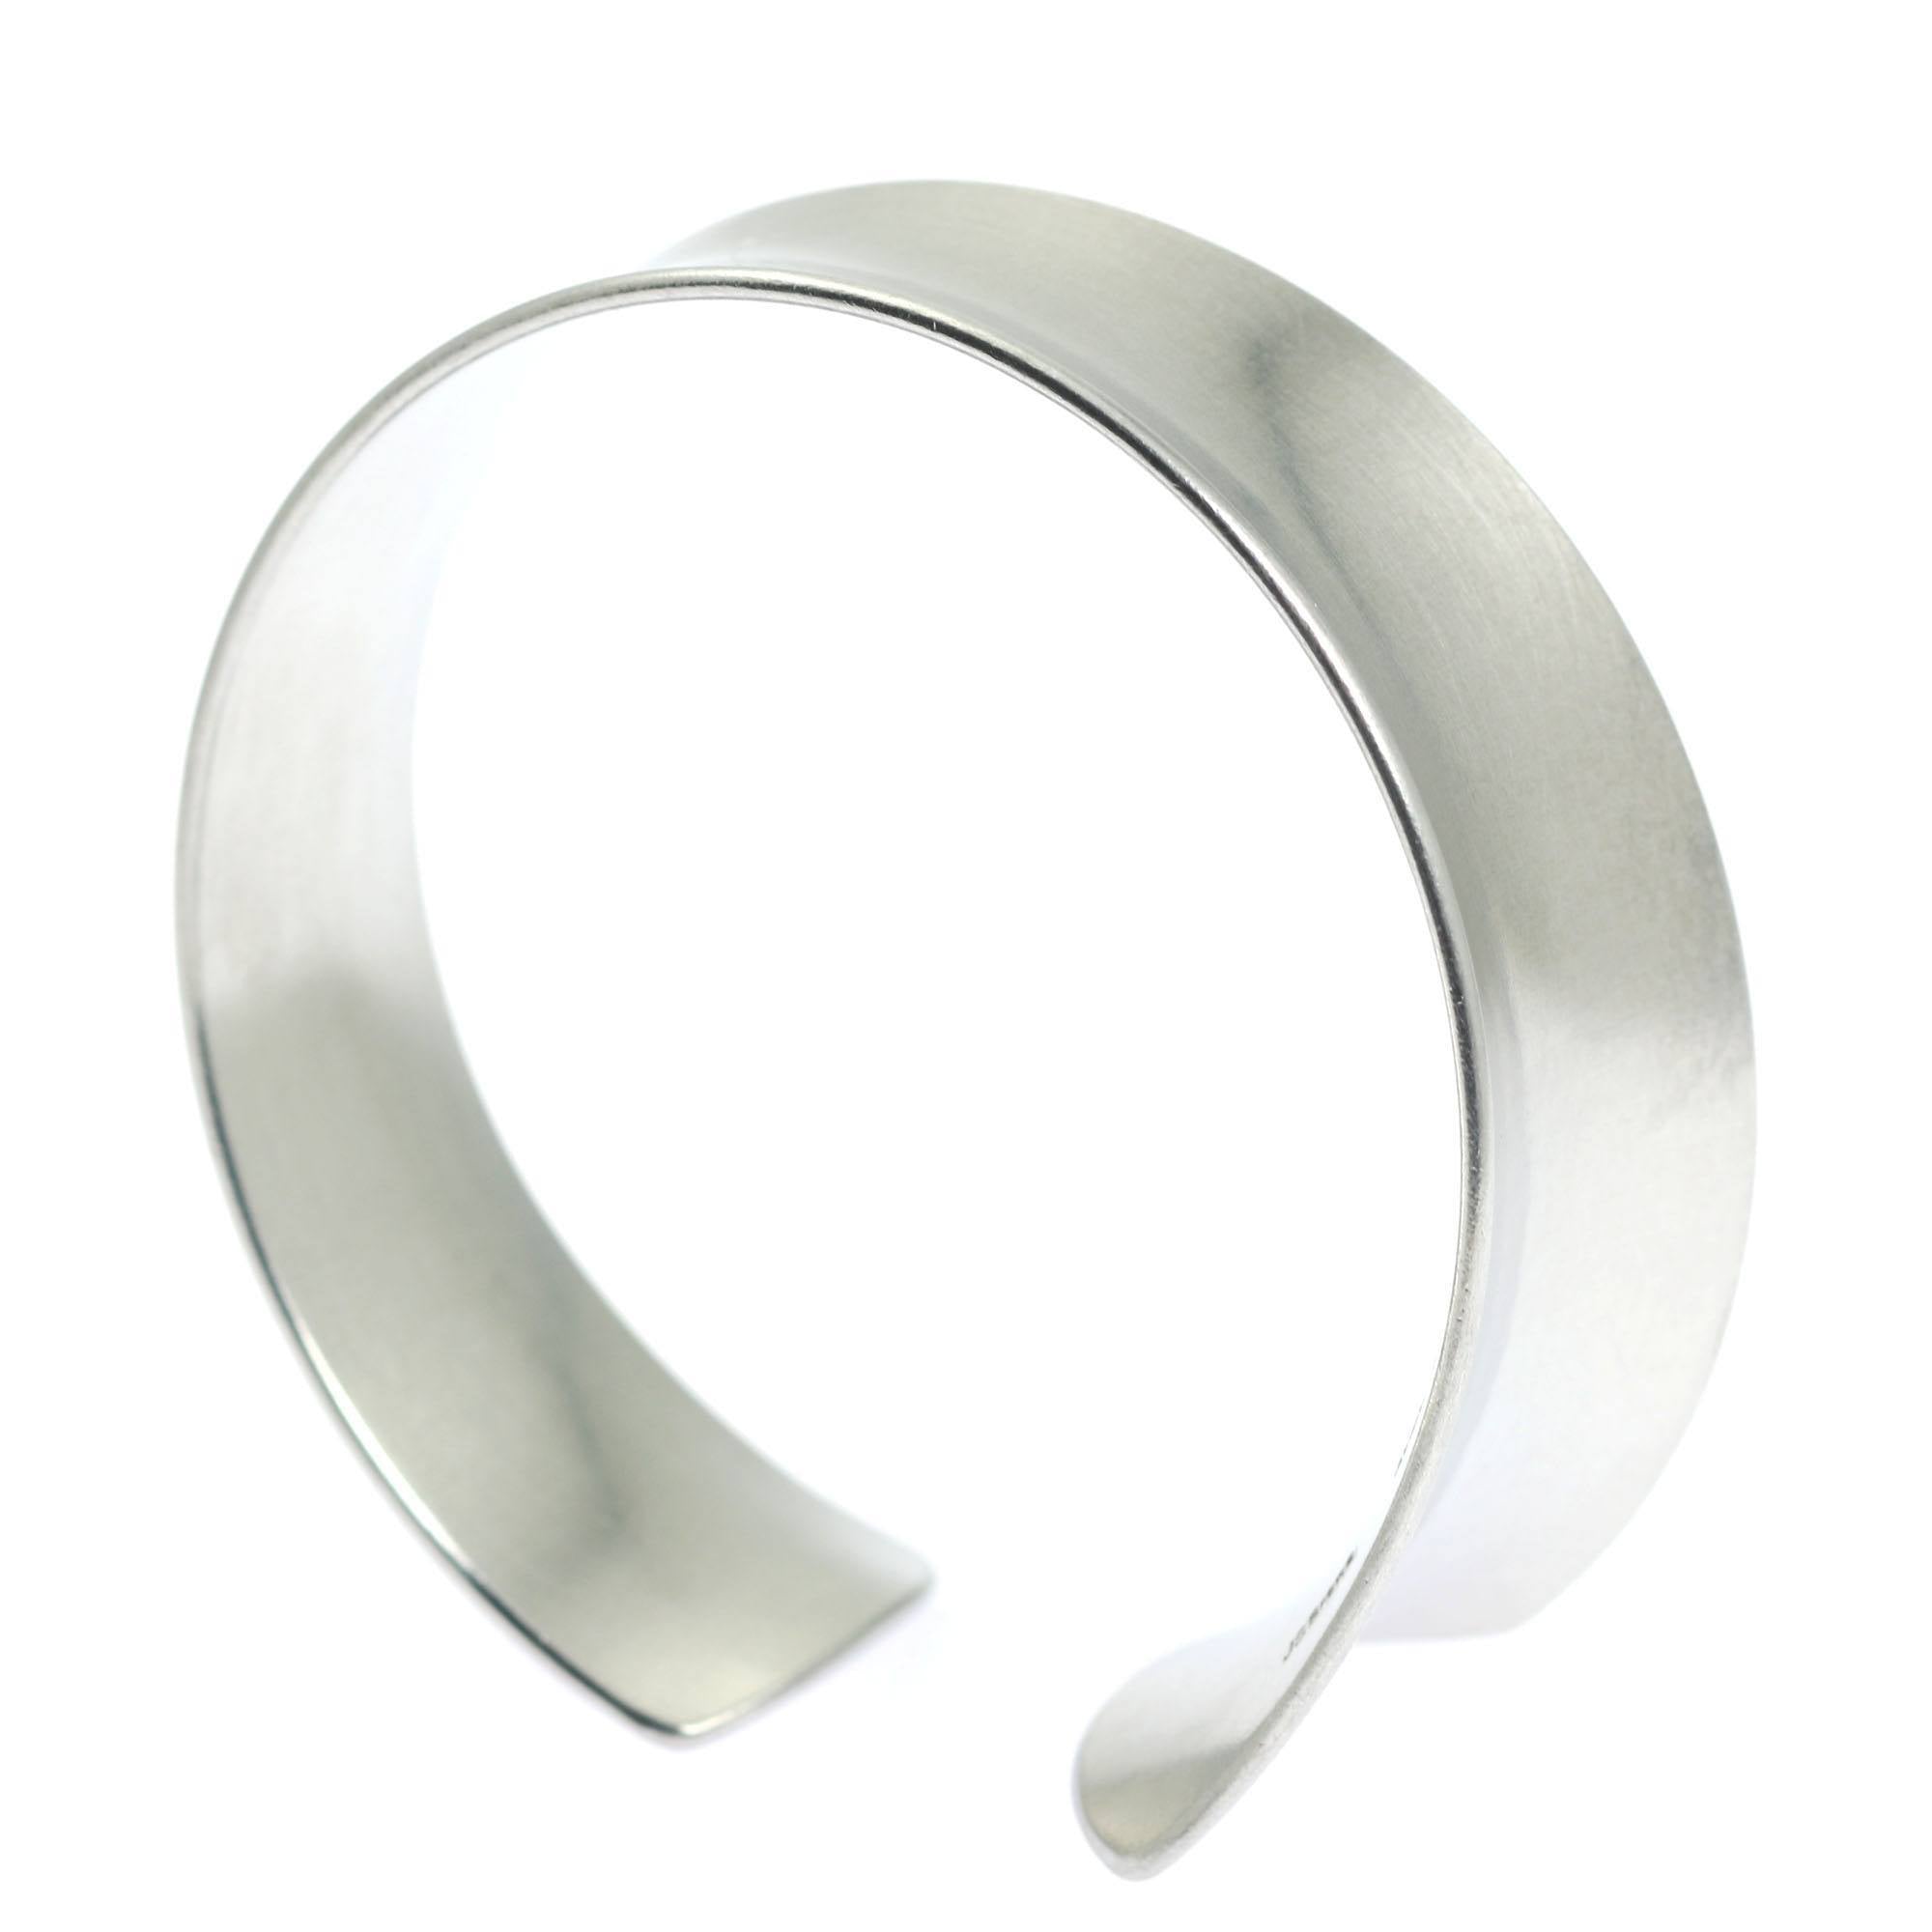 Right View of Tapered Brushed Anticlastic Aluminum Bangle 